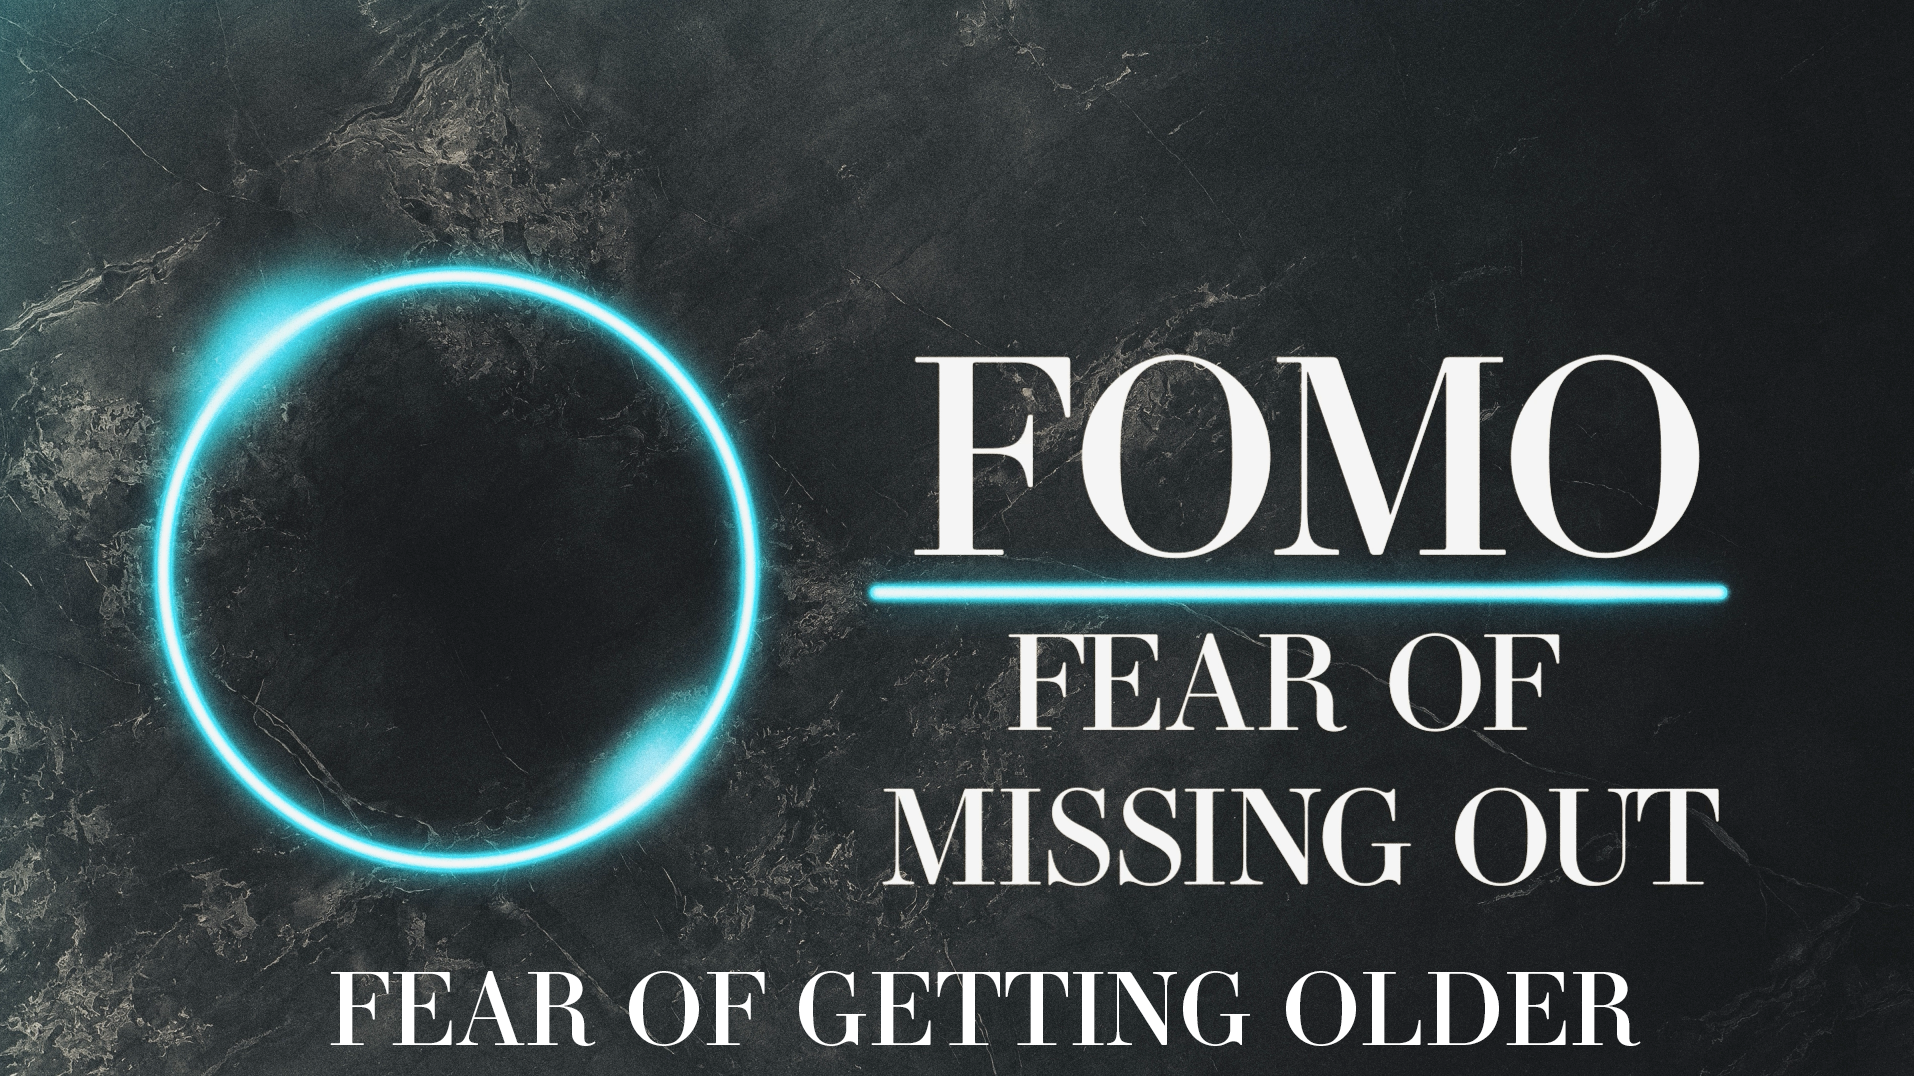 FOMO PART 4 "Fear of Getting Older" (Traditional Service)